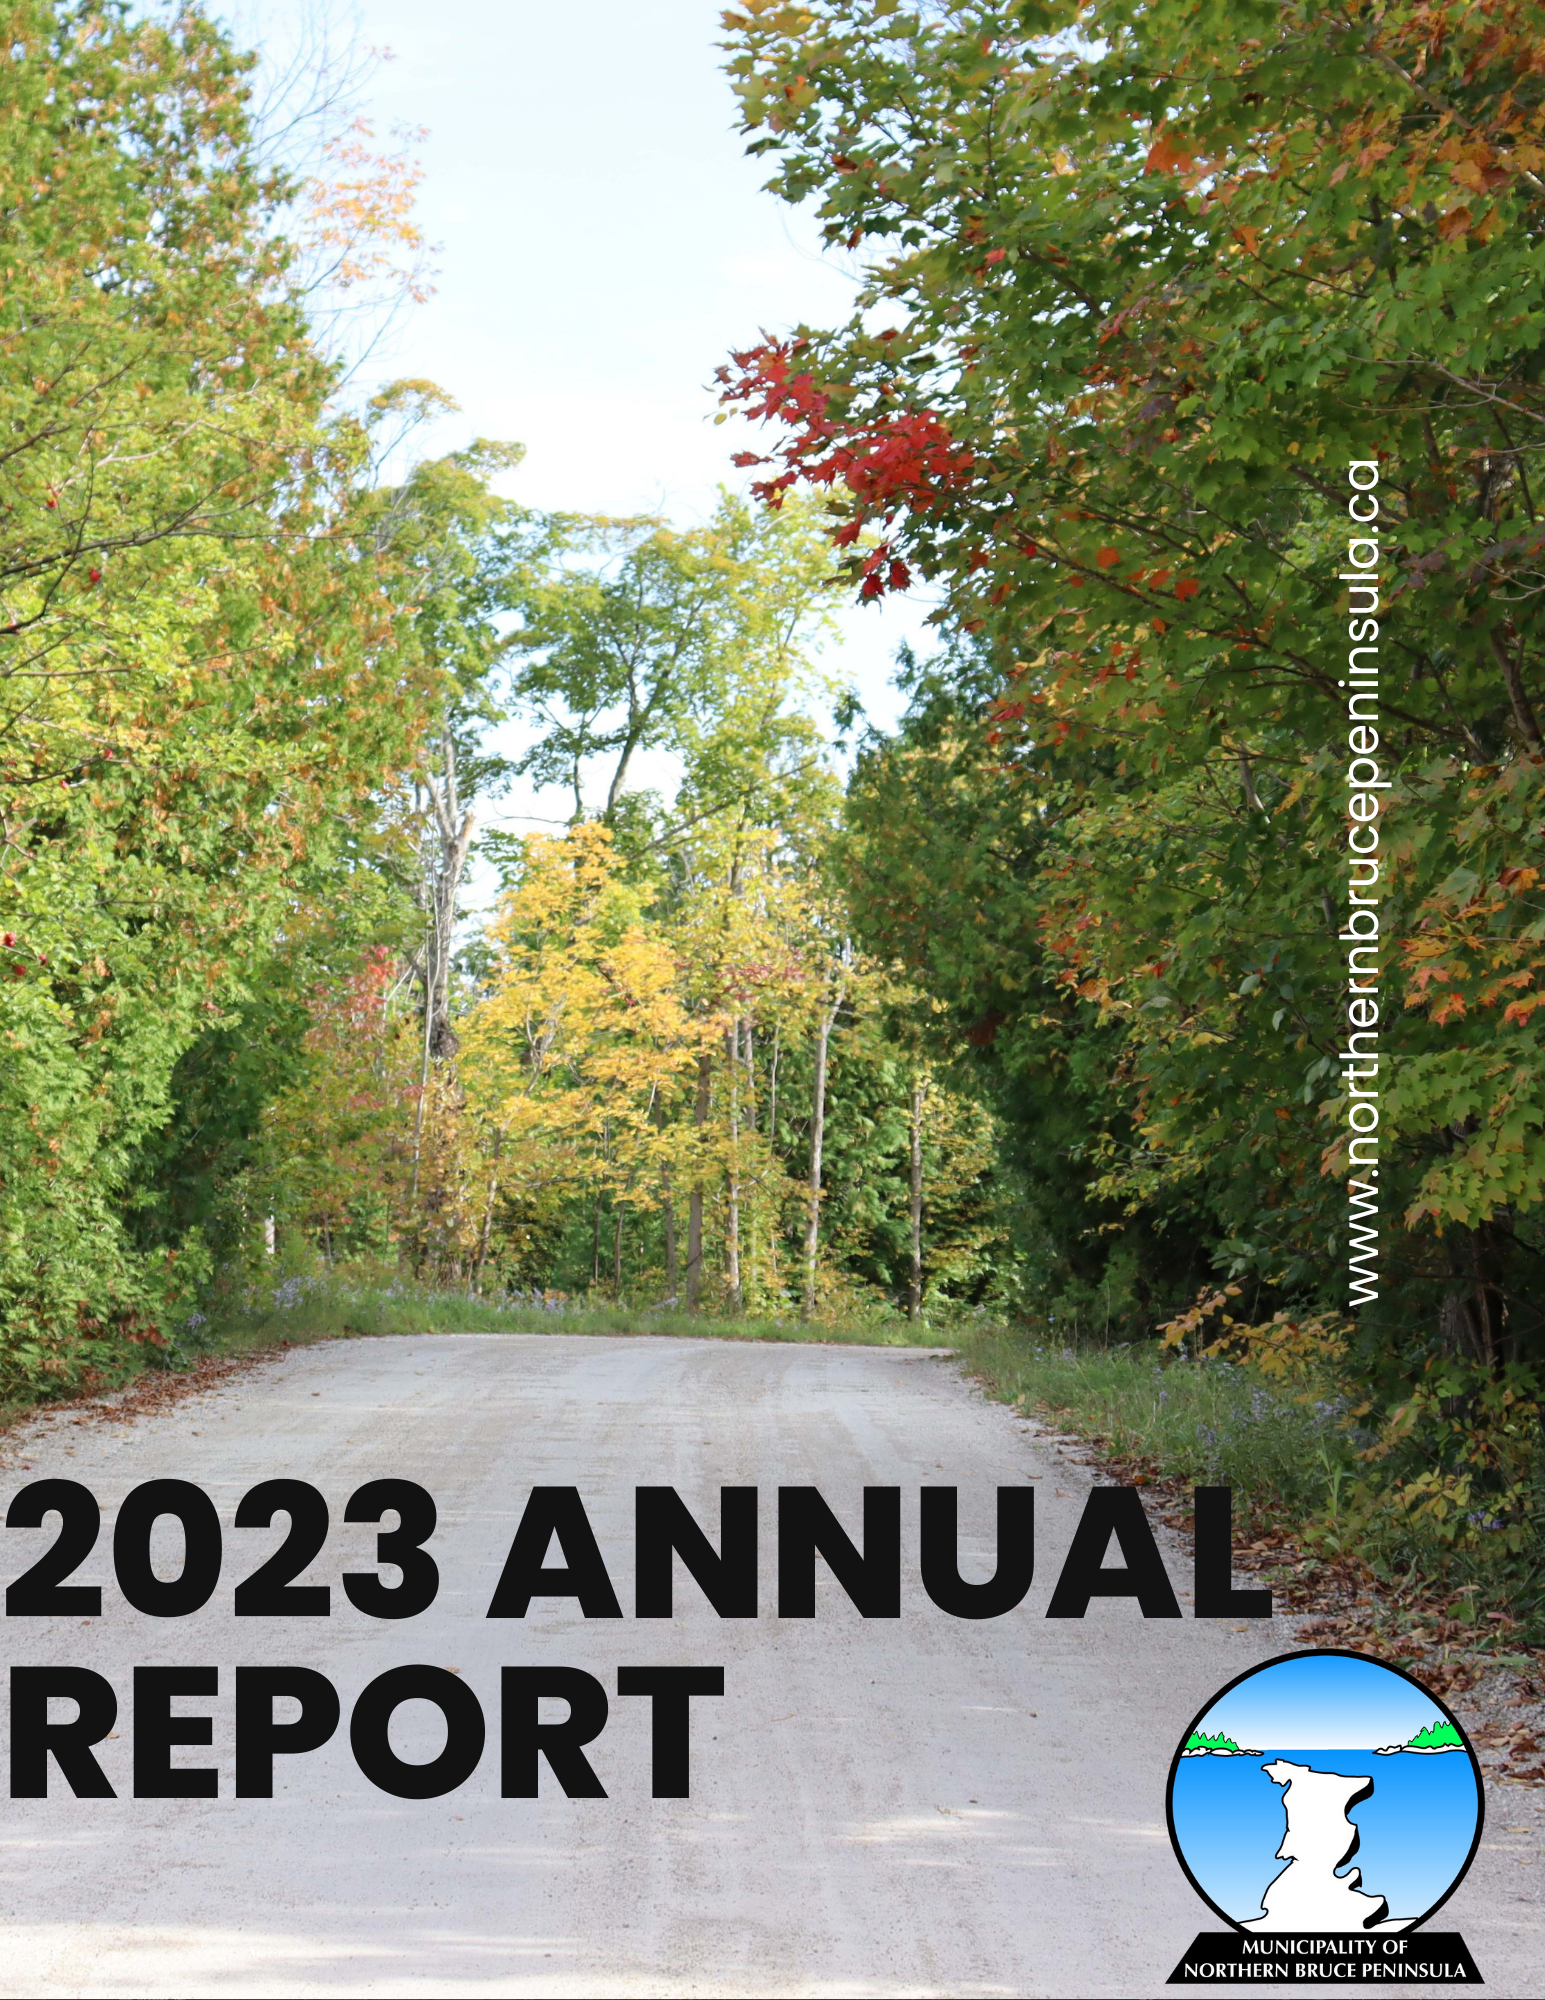 Image of Municipality's 2023 Annual Report